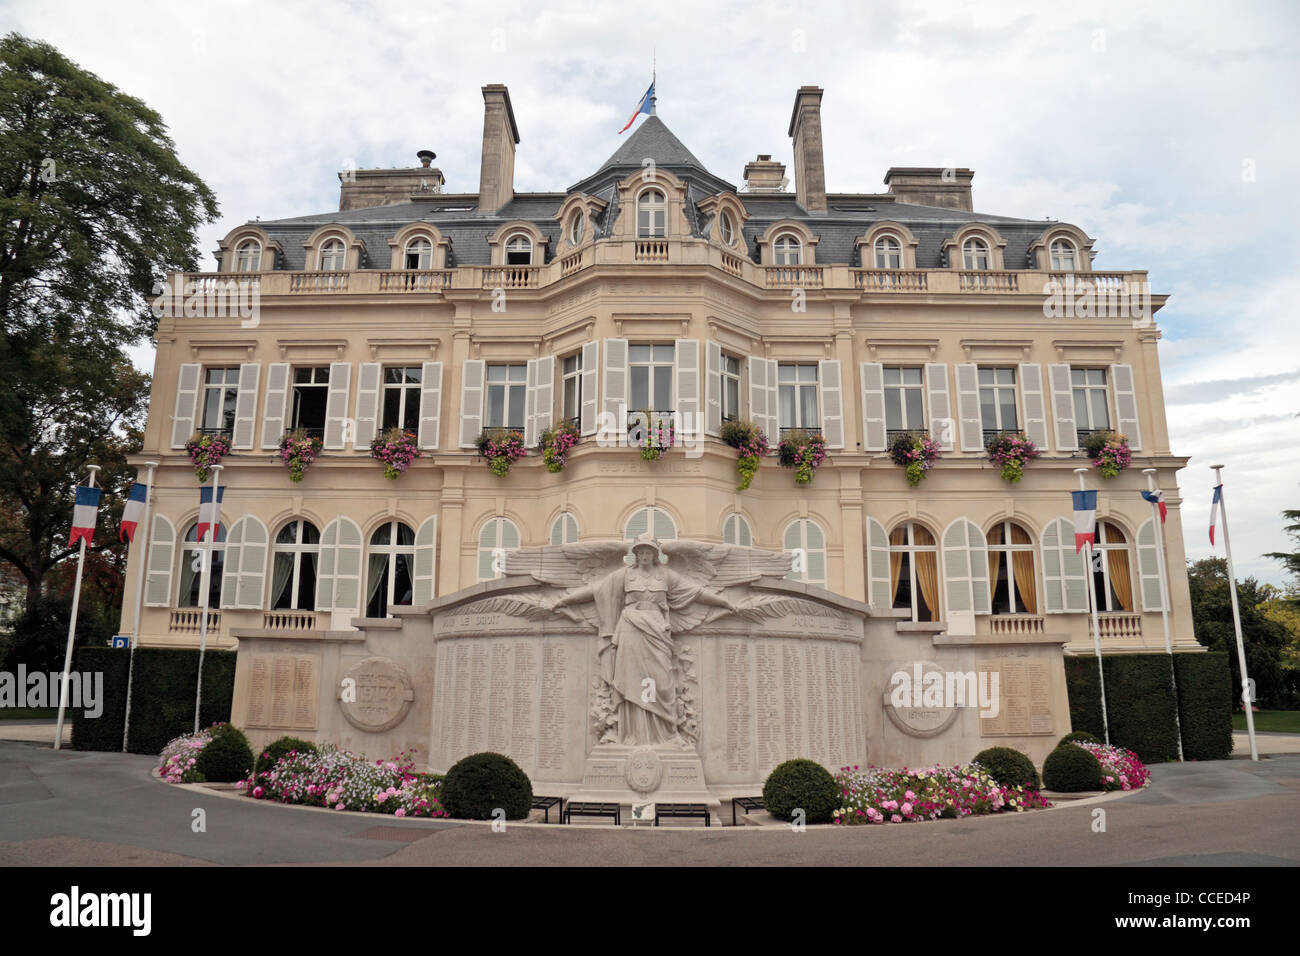 The monument to the fallen in front of the Hotel de Ville (town hall), Épernay, Champagne-Ardenne, Marne, France. Stock Photo